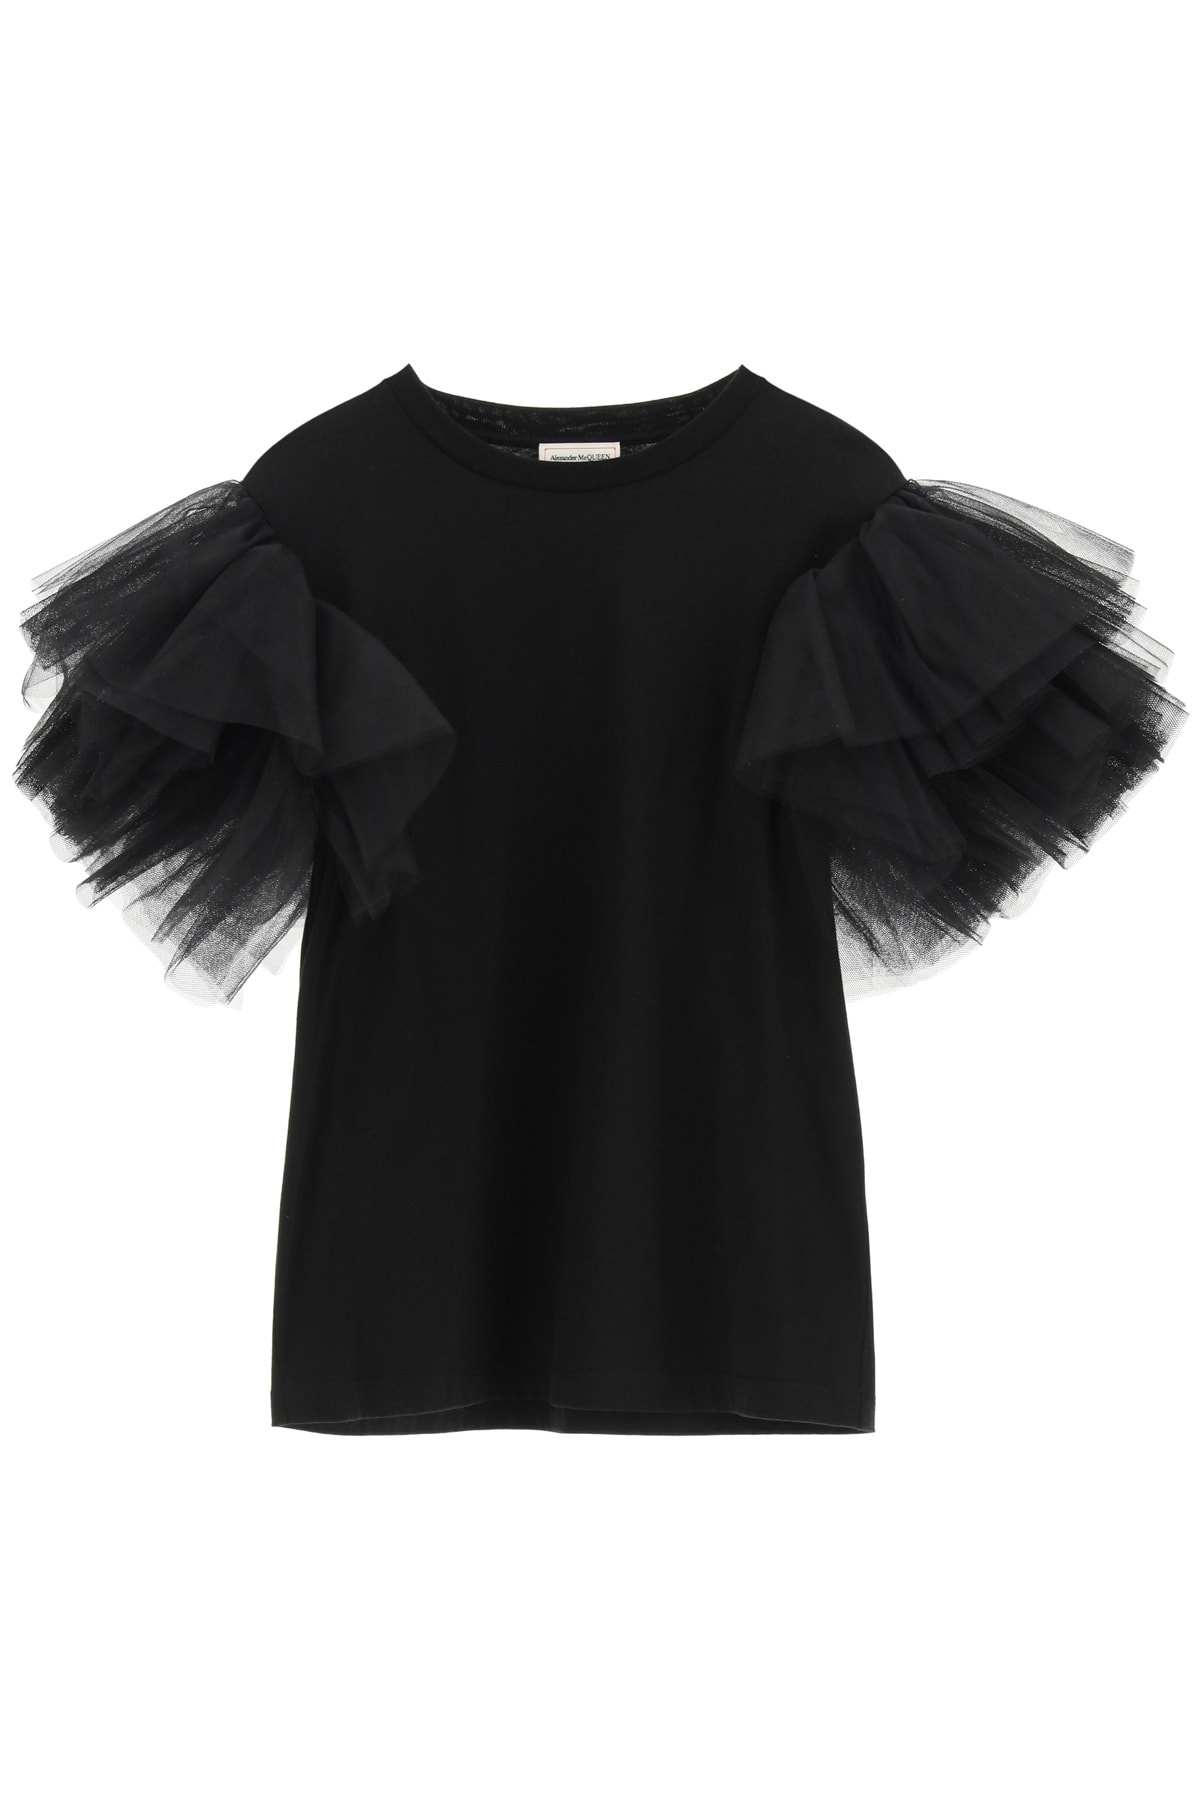 Alexander McQueen Jersey And Tulle Top